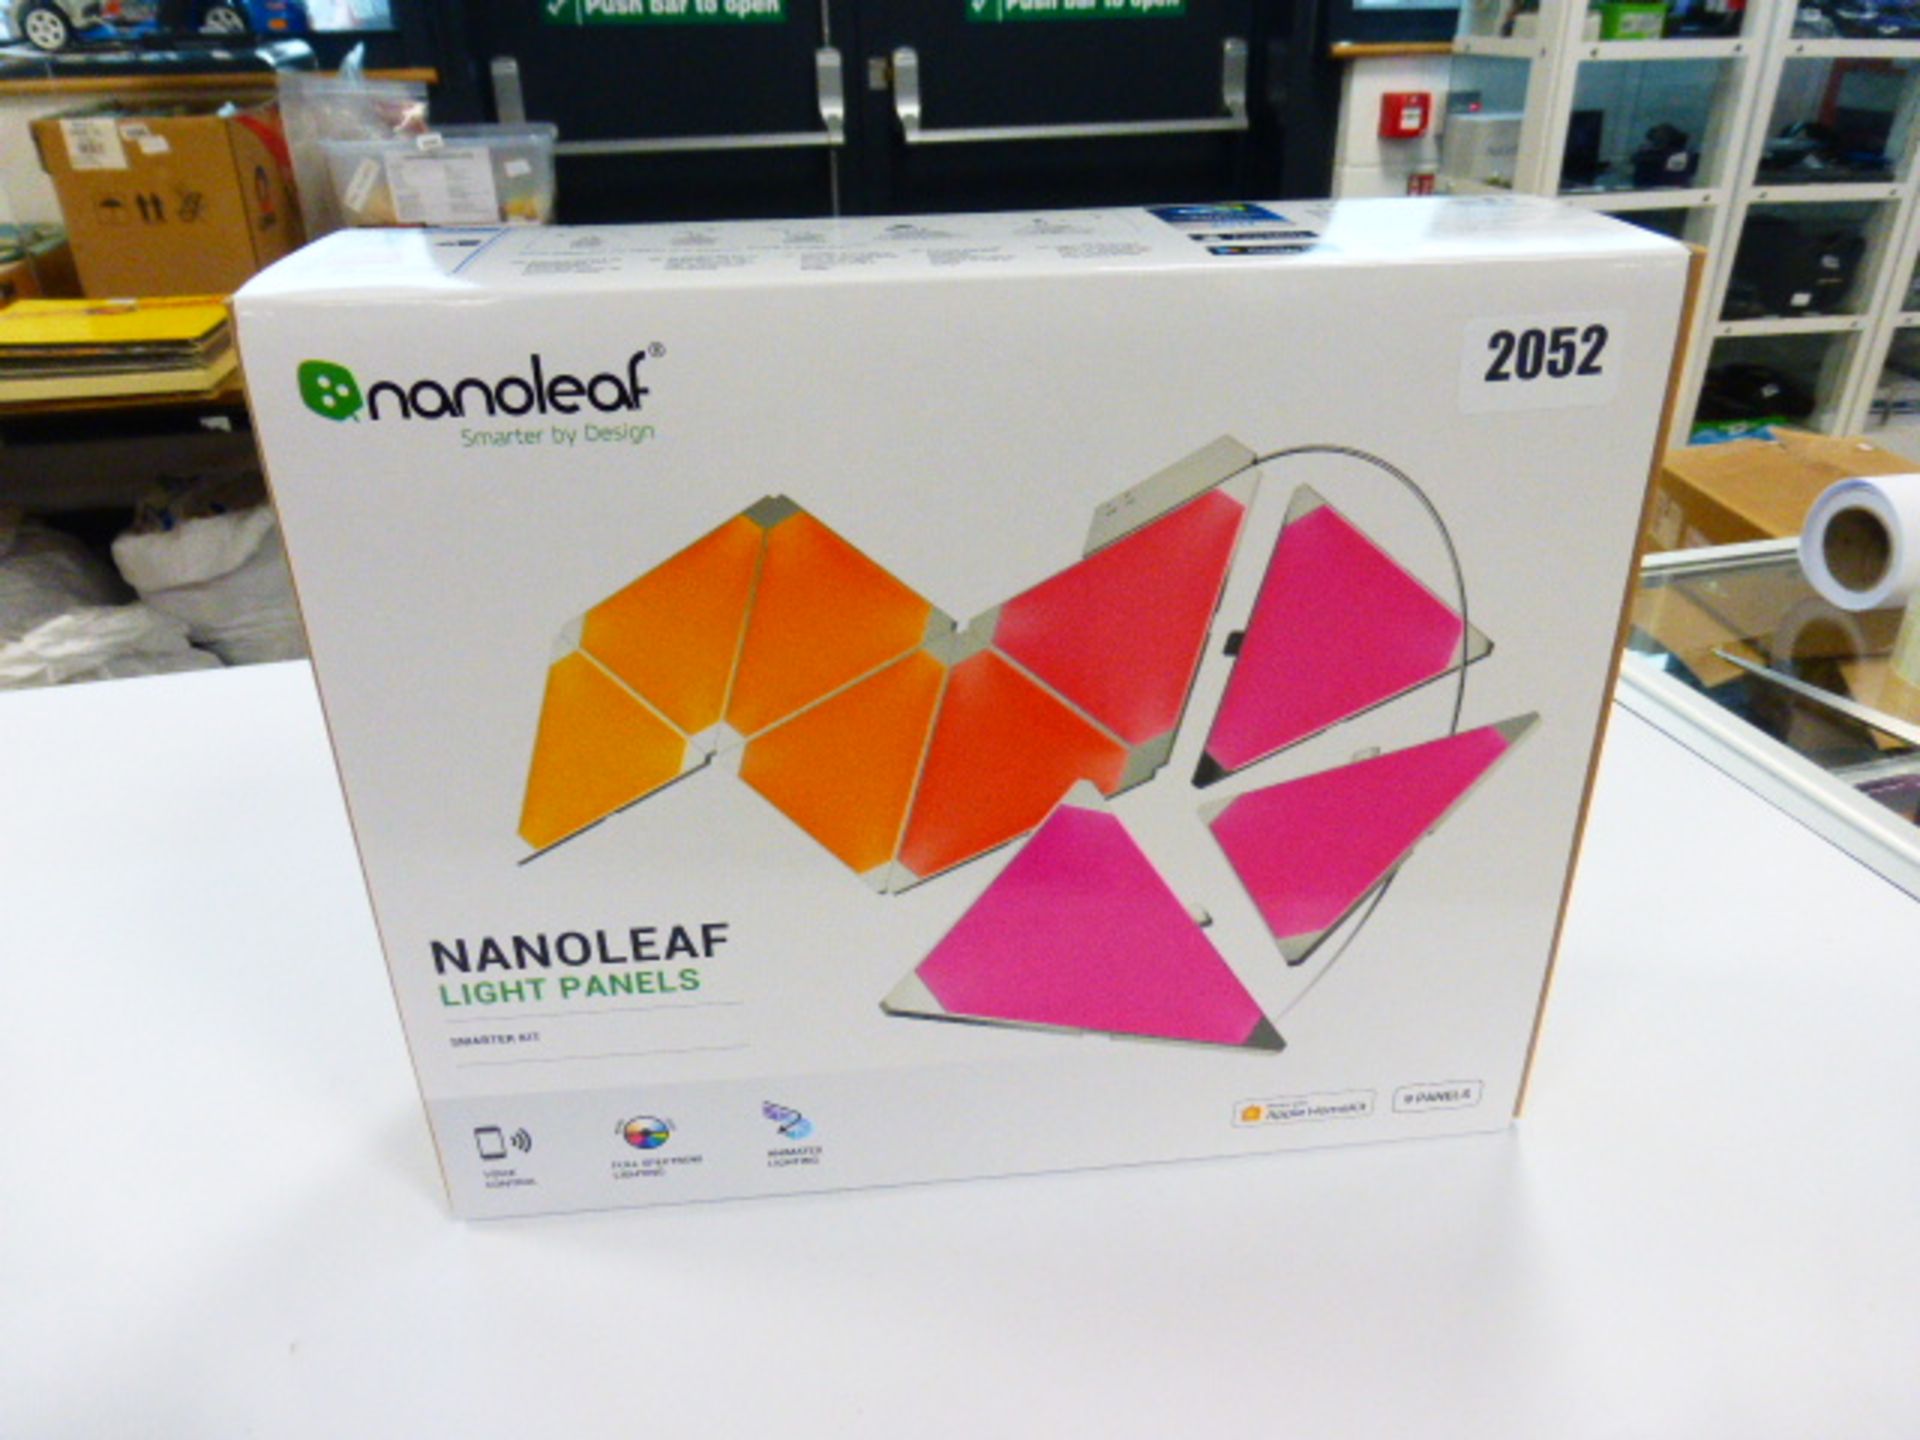 Nanoleaf light panels smarter kit with Amazon and Google assistant control includes 9 panels in